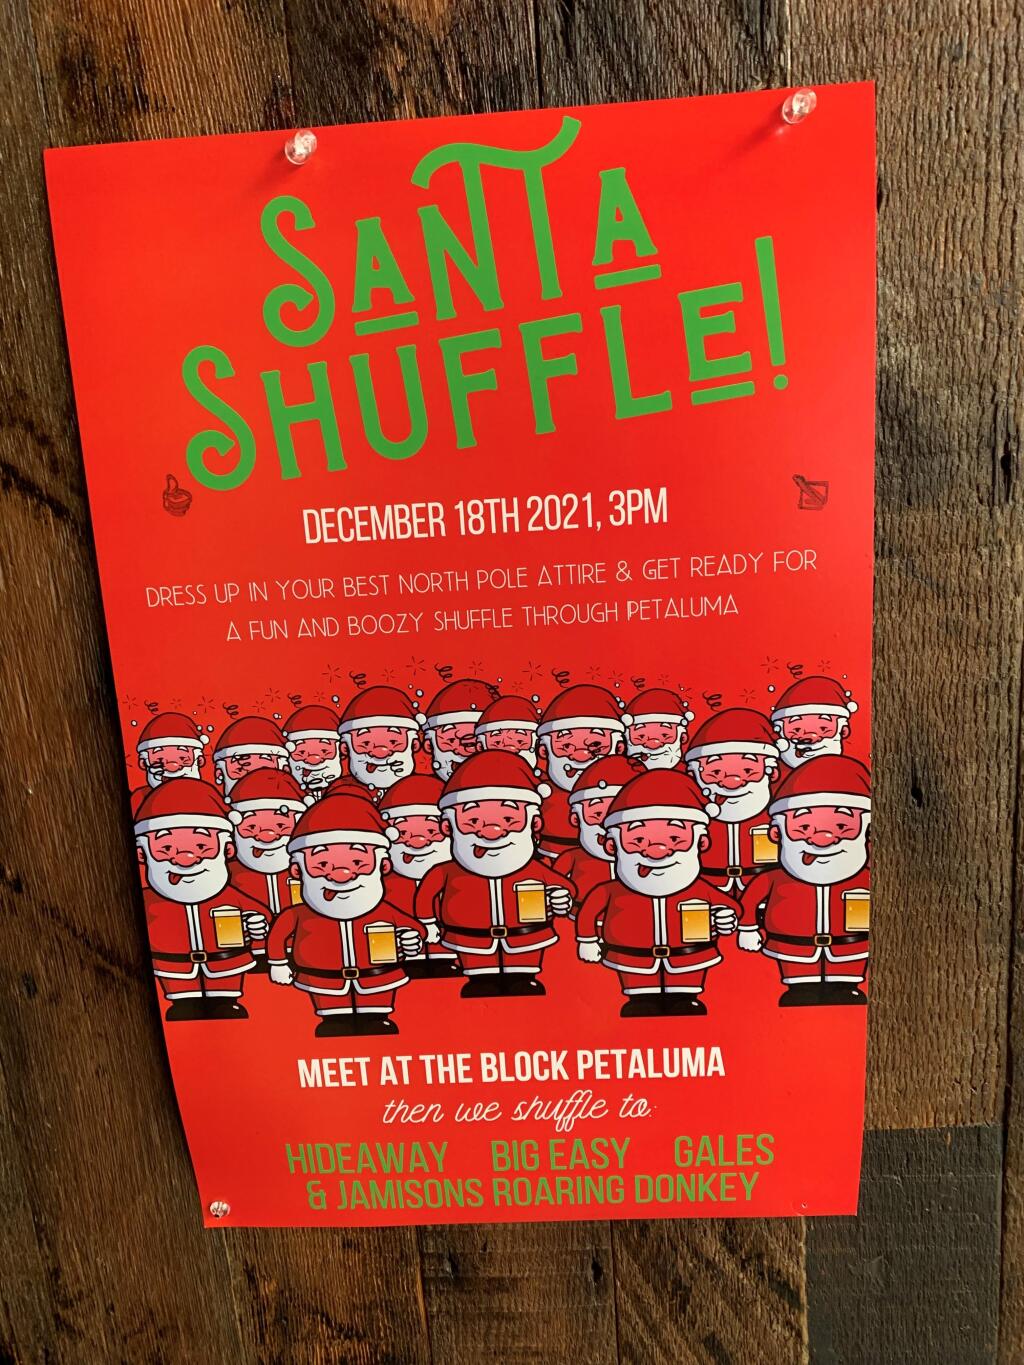 If you see dozens of Santas meandering around downtown Petaluma this Saturday, chances are good they are participating in the Santa Shuffle. (DAVID TEMPLETON/ARGUS-COURIER STAFF)